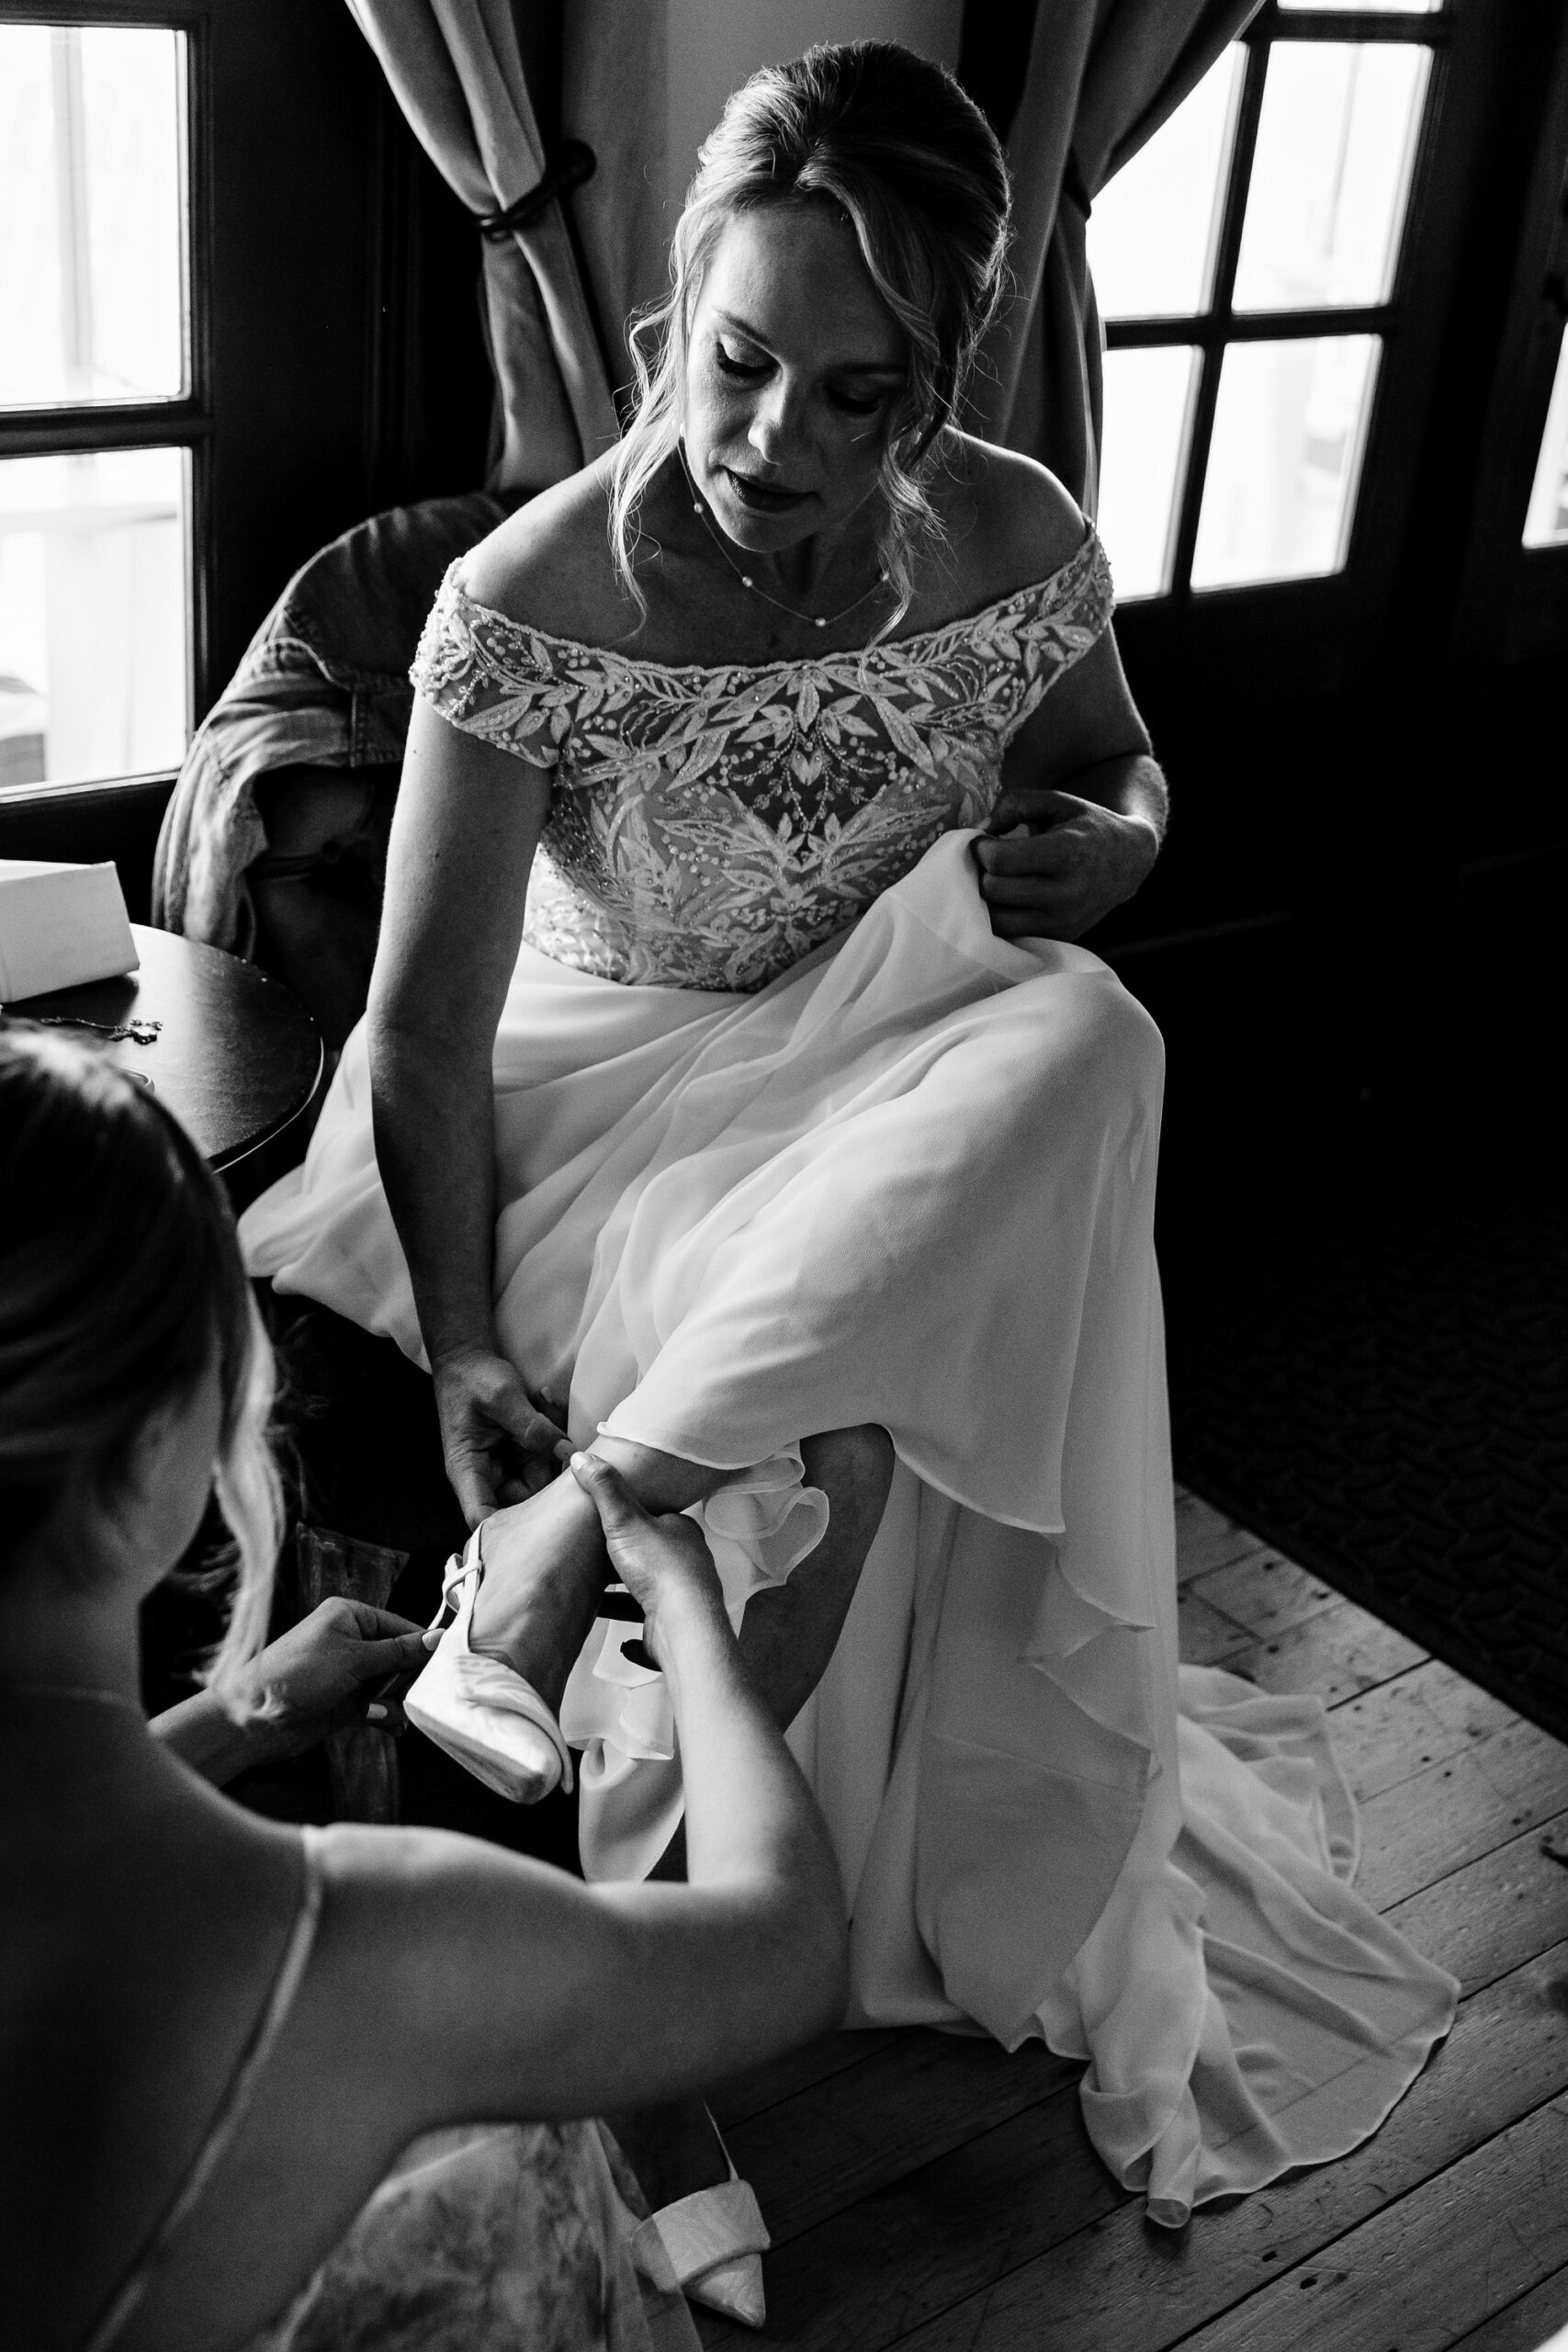 The bride gets ready at a wedding at an estate in Maine